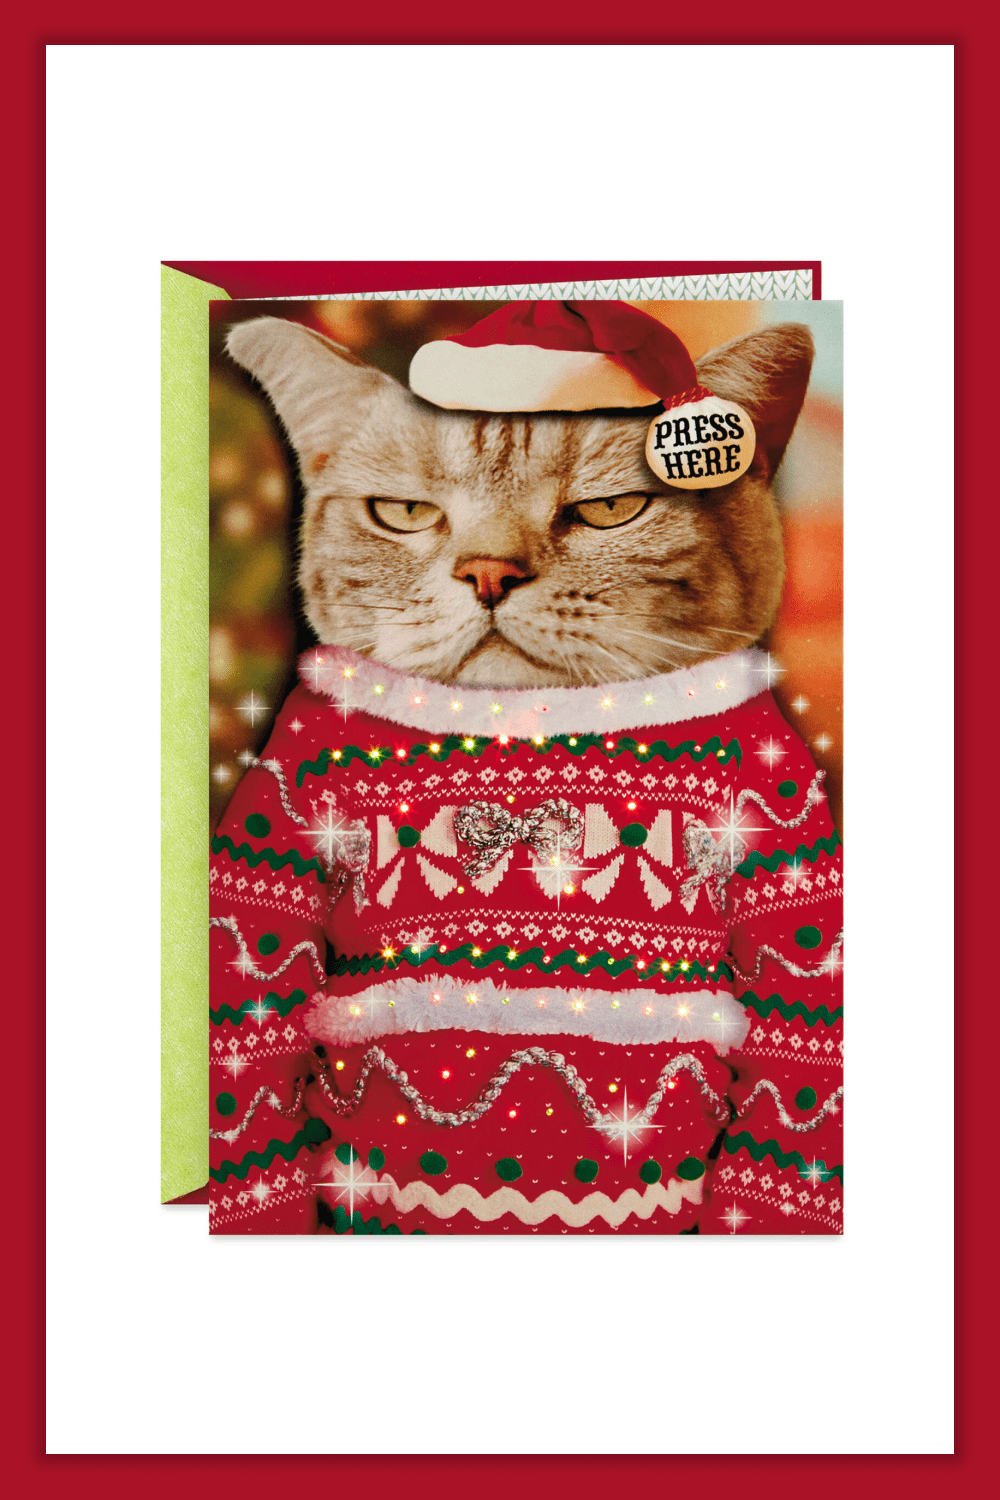 Card with a grumpy cat in a funny Christmas sweater.